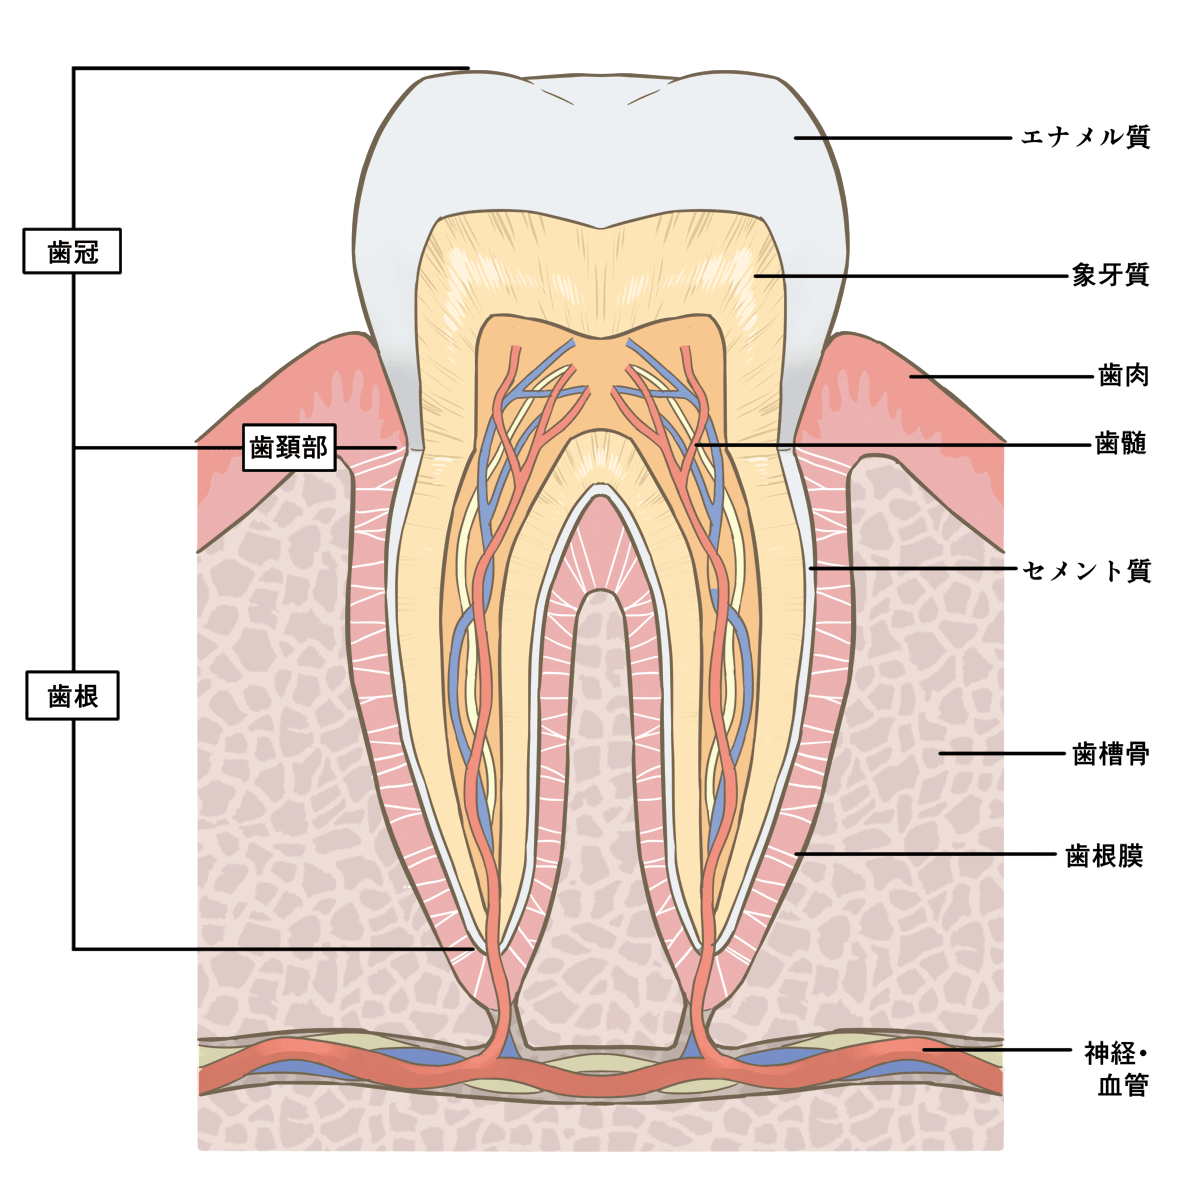 tooth-cross-sectional-view